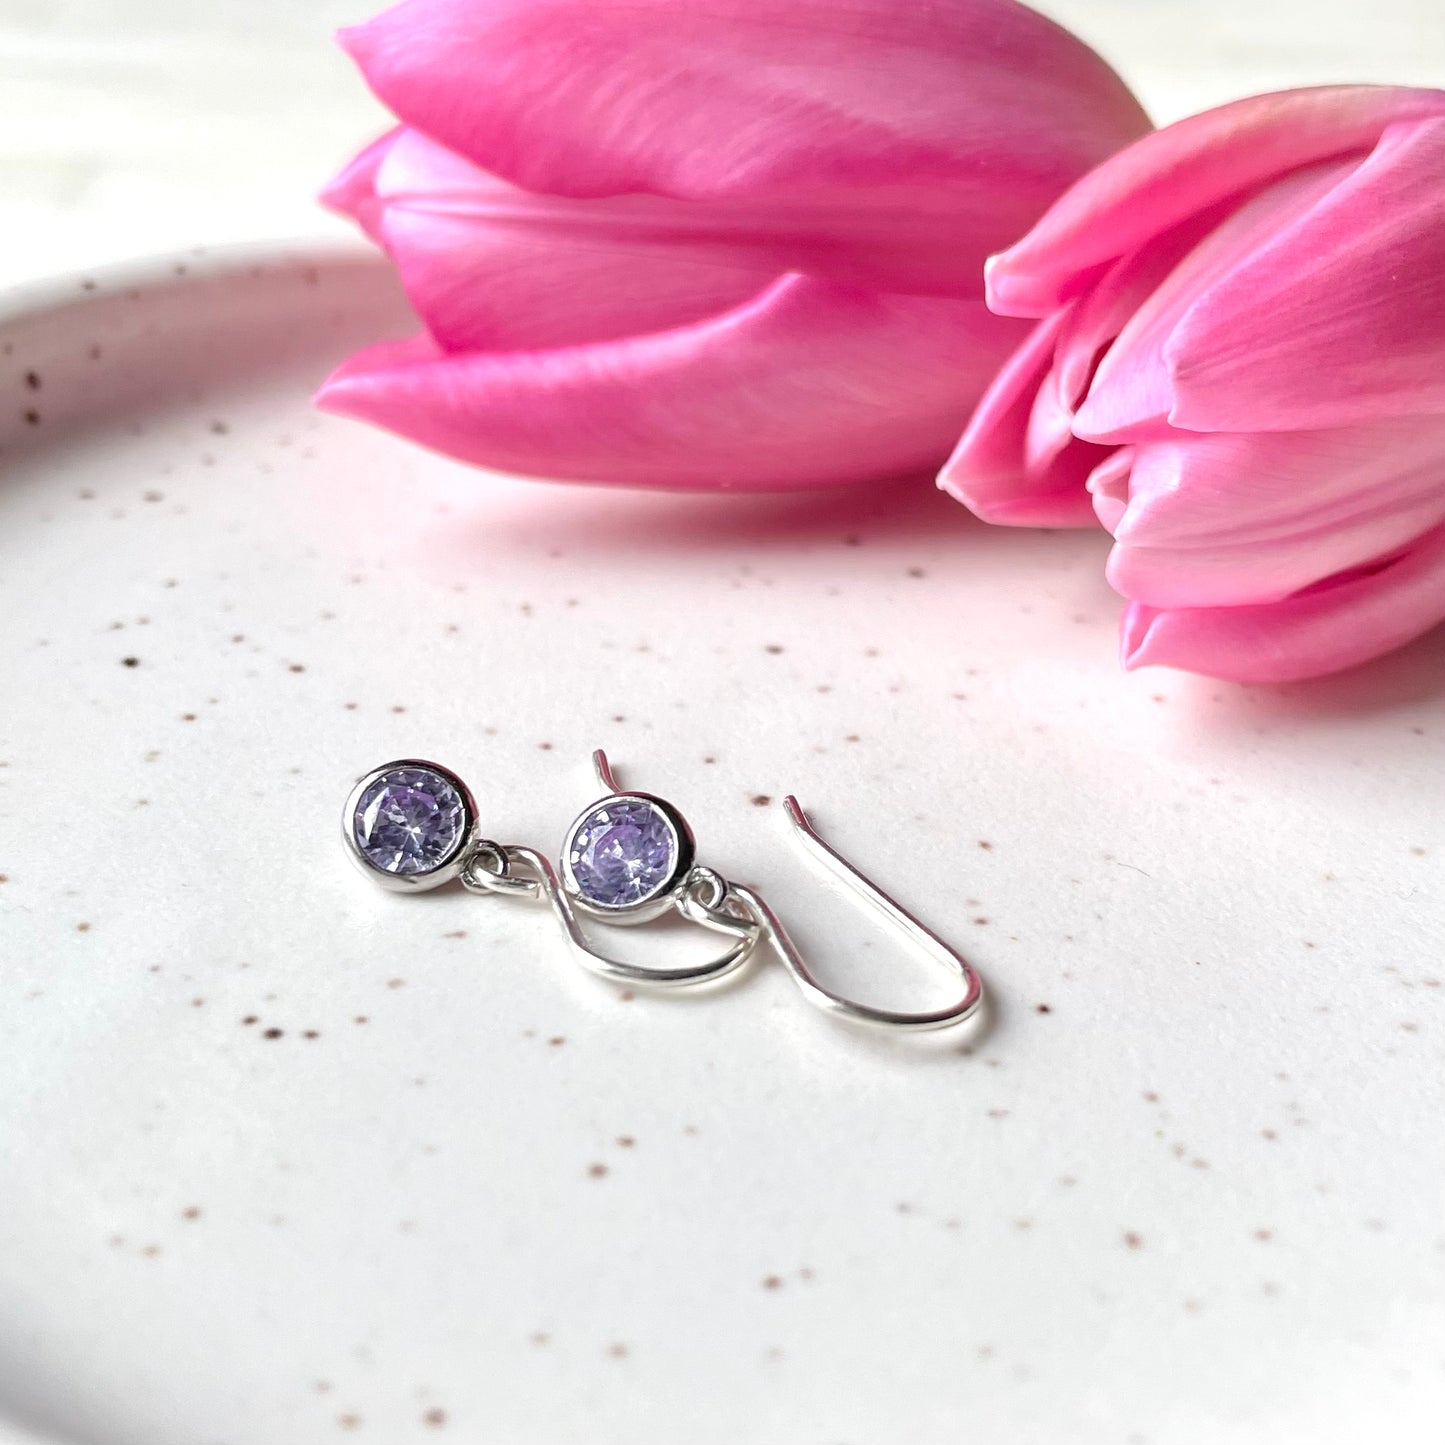 June Birthstone earrings. Sterling silver and cubic zirconia. Made in Canada by Wallis Designs.